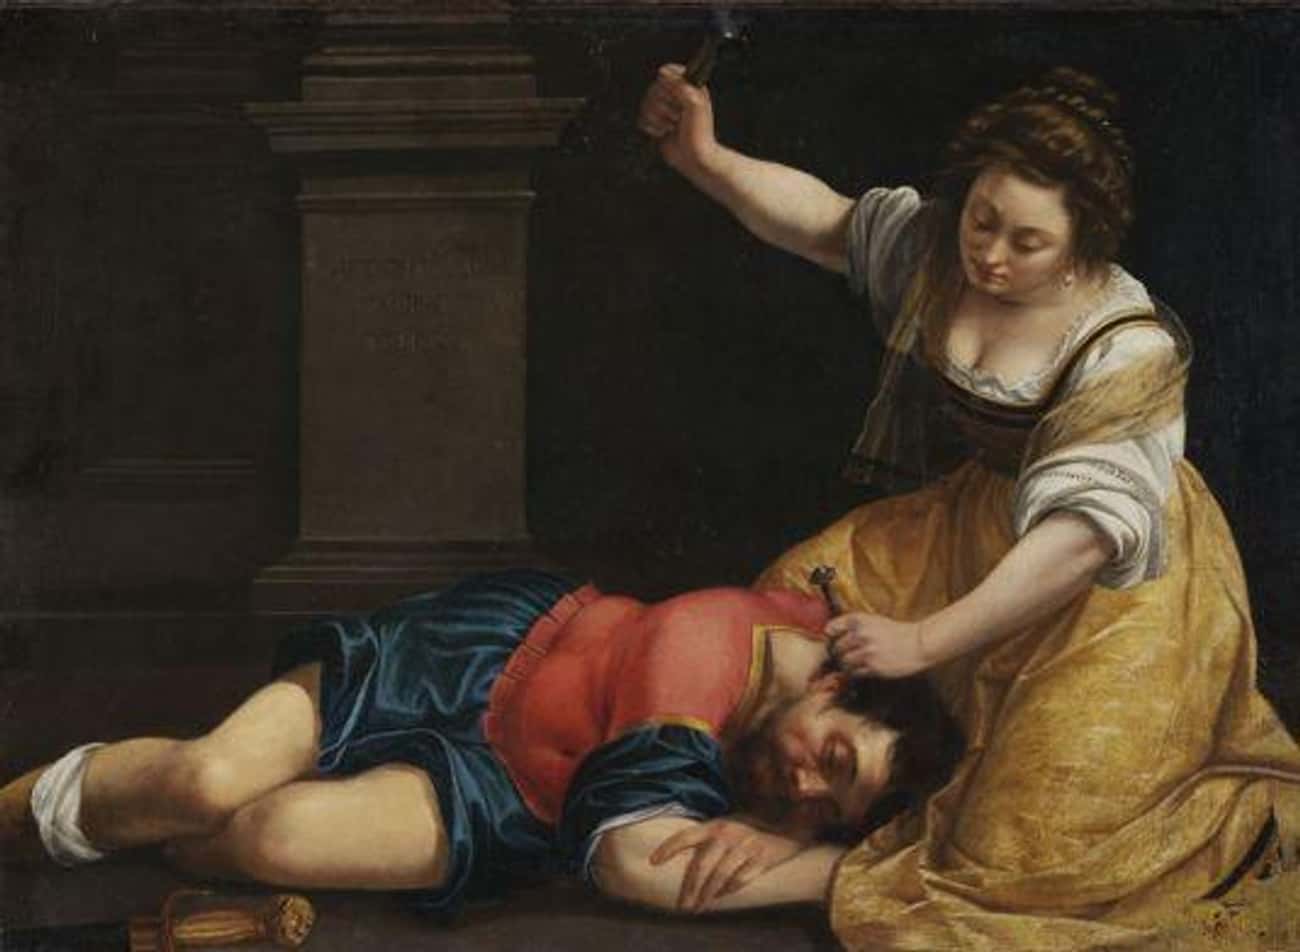 Sisera's Head Was Nailed To The Ground